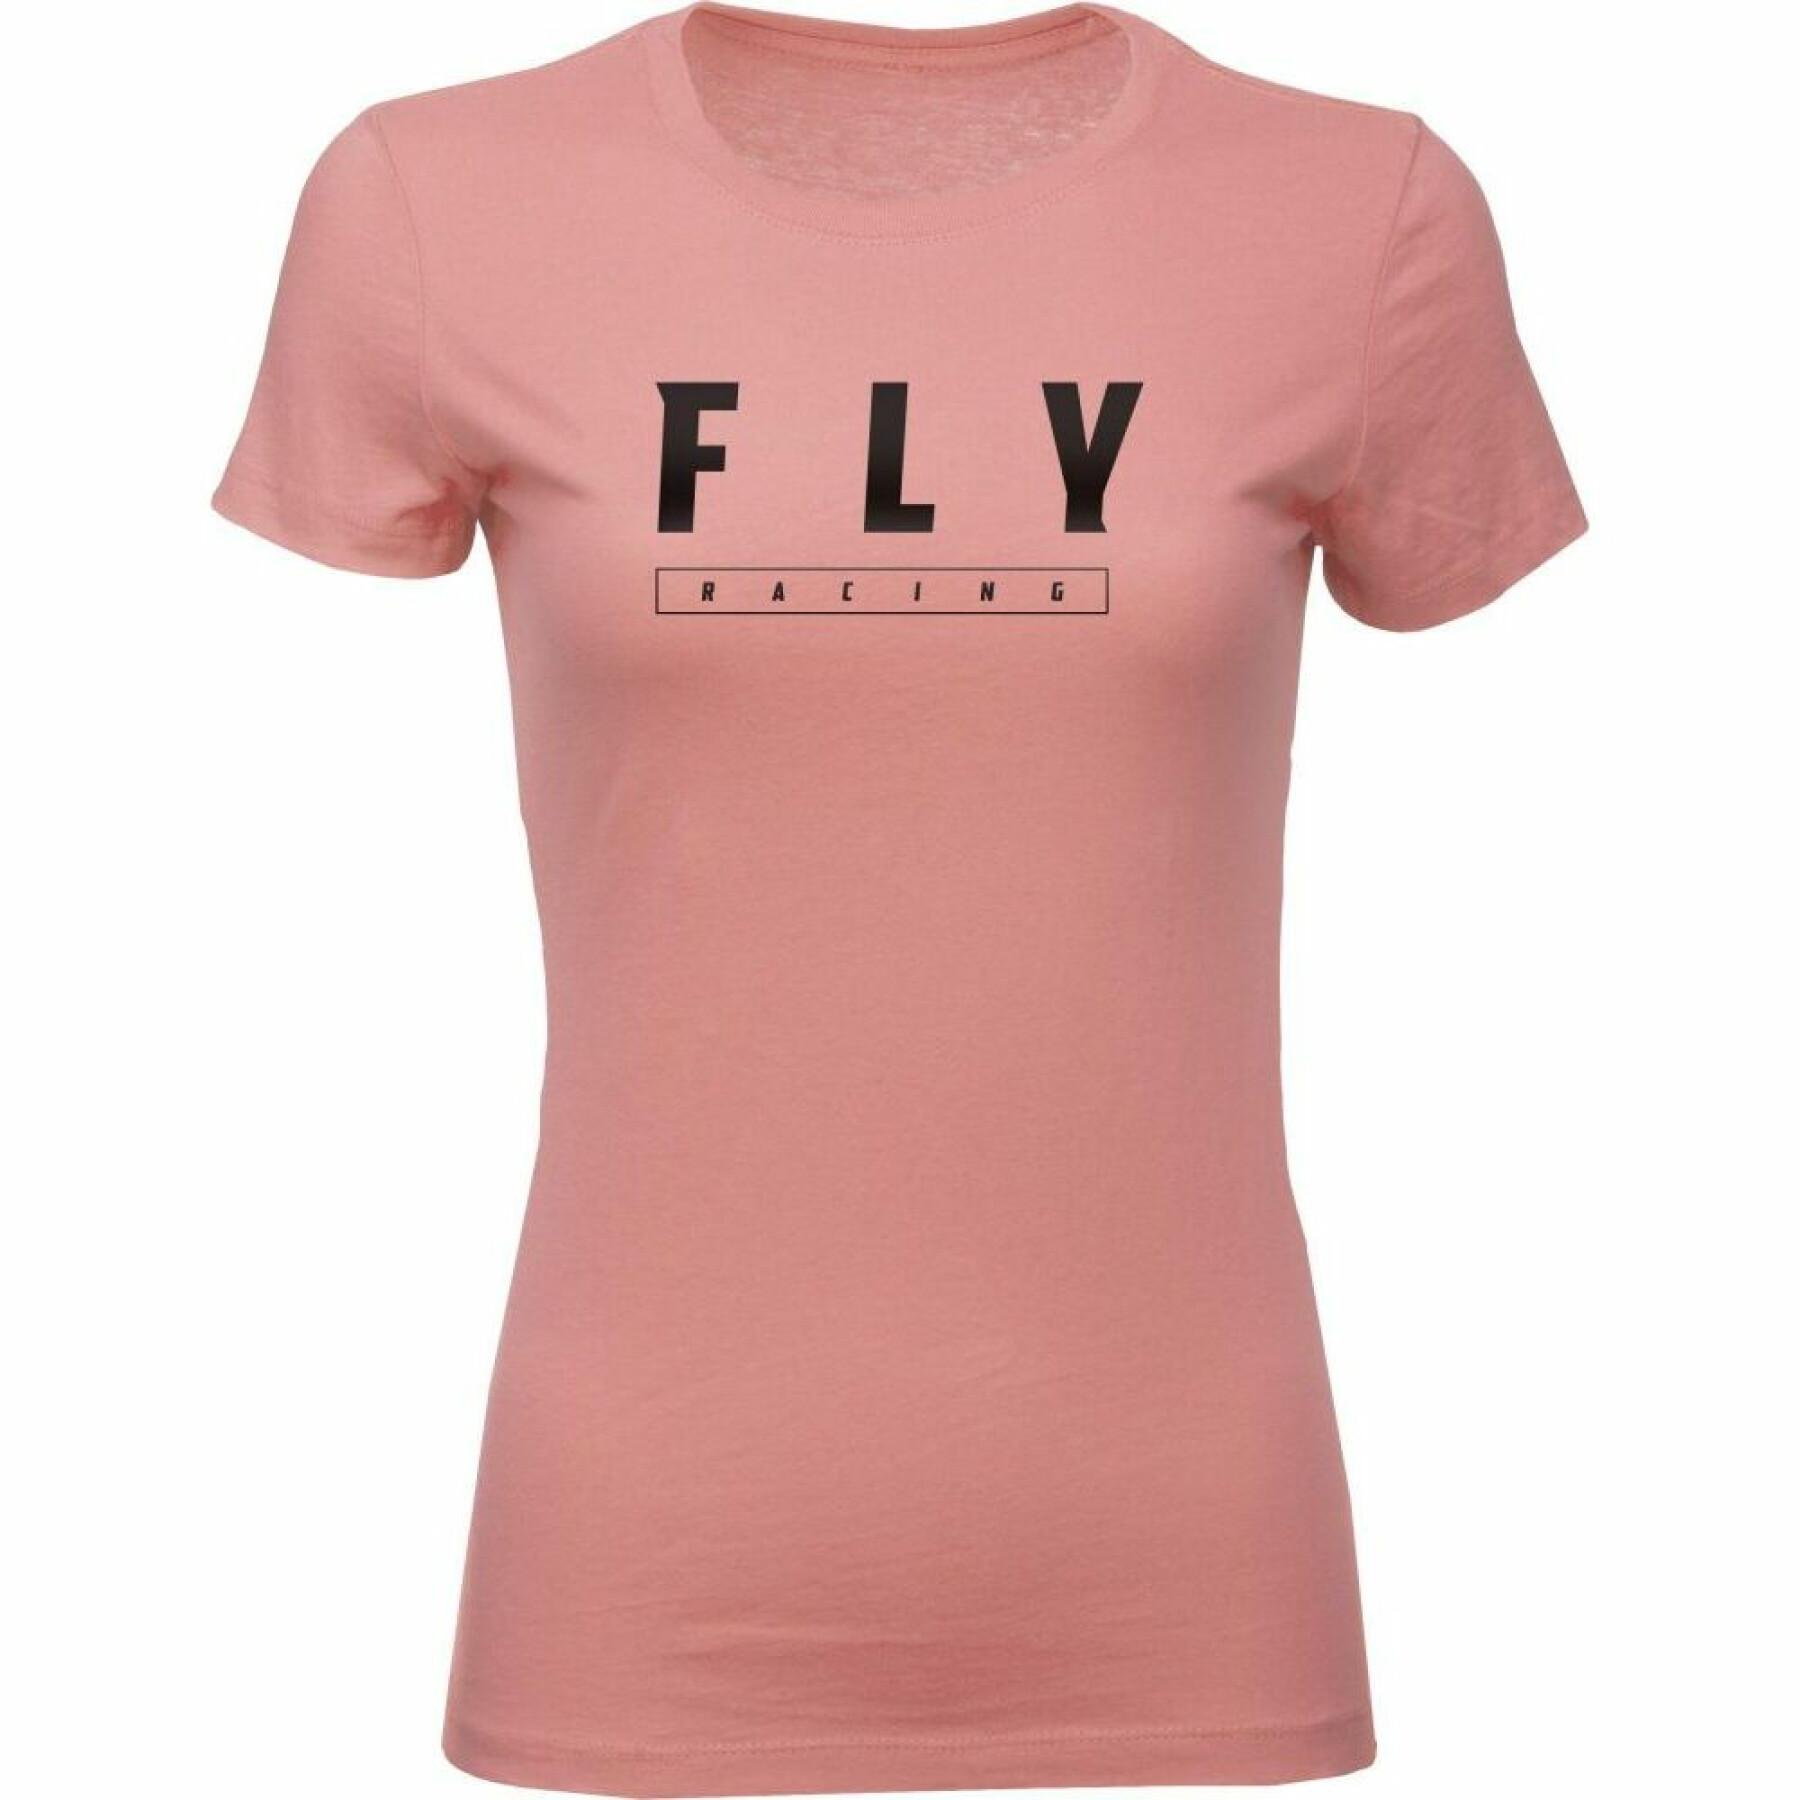 T-shirt manches longues femme Fly Racing Logo